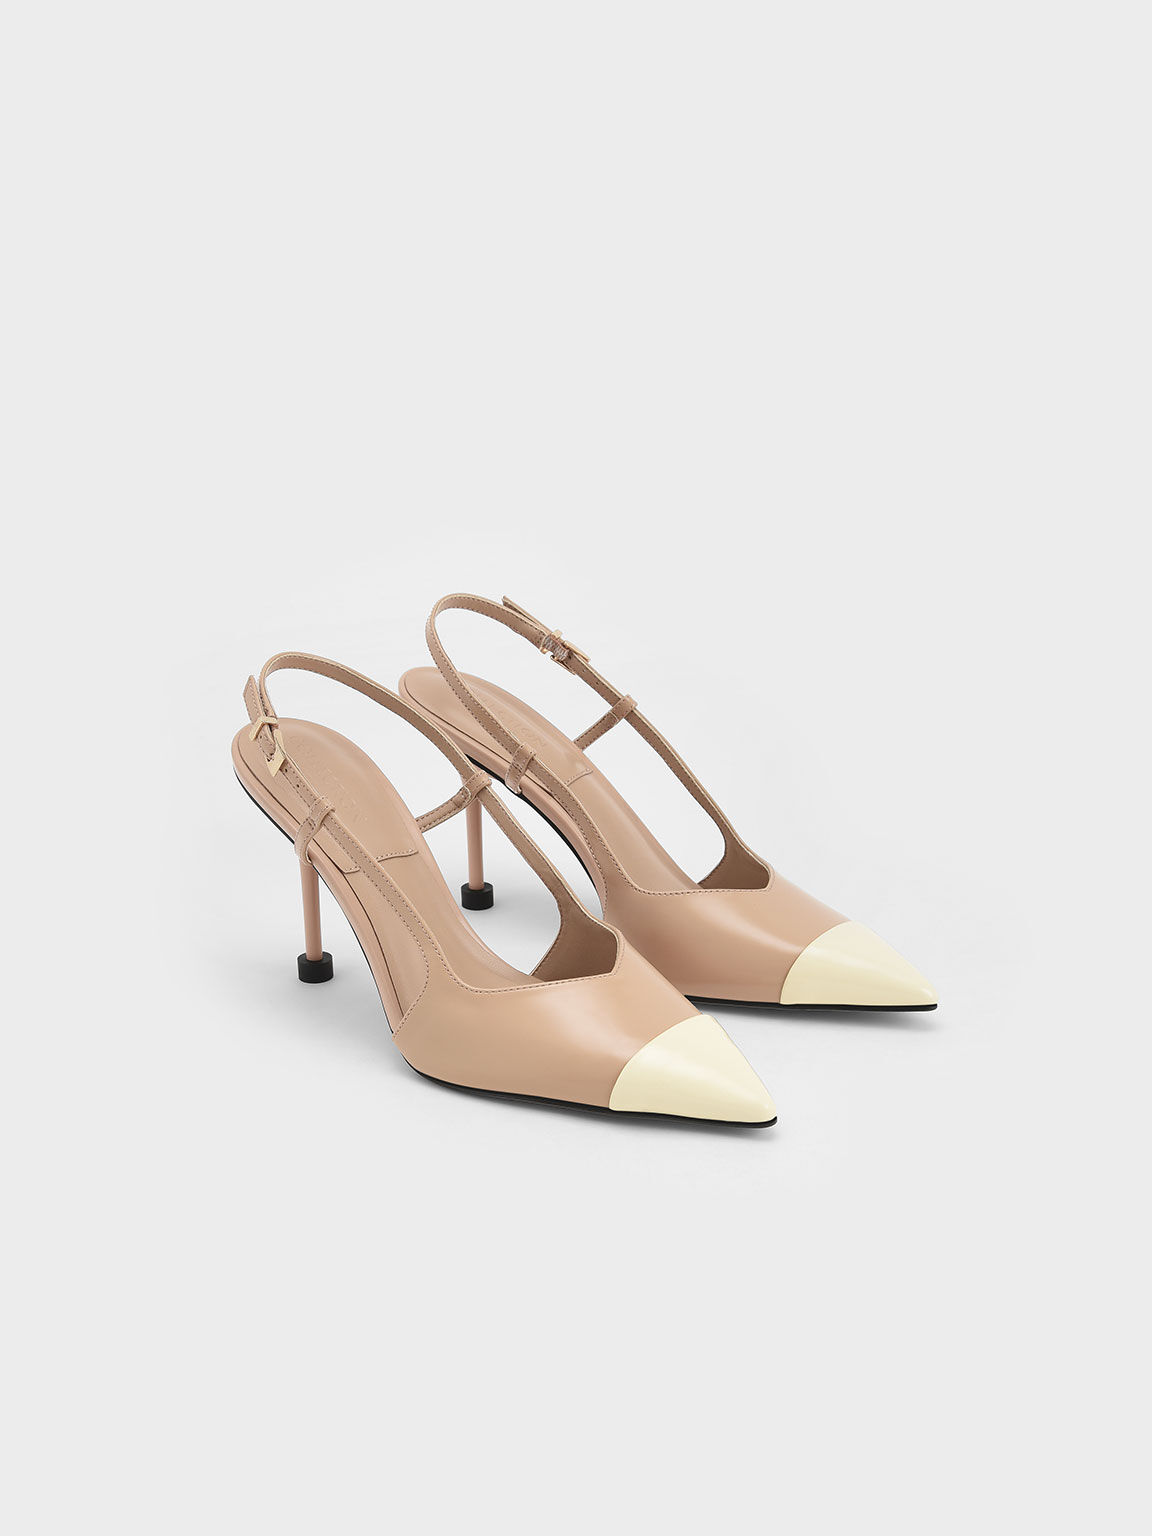 Nude Patent Leather Slingback Stiletto Pumps - CHARLES & KEITH KH